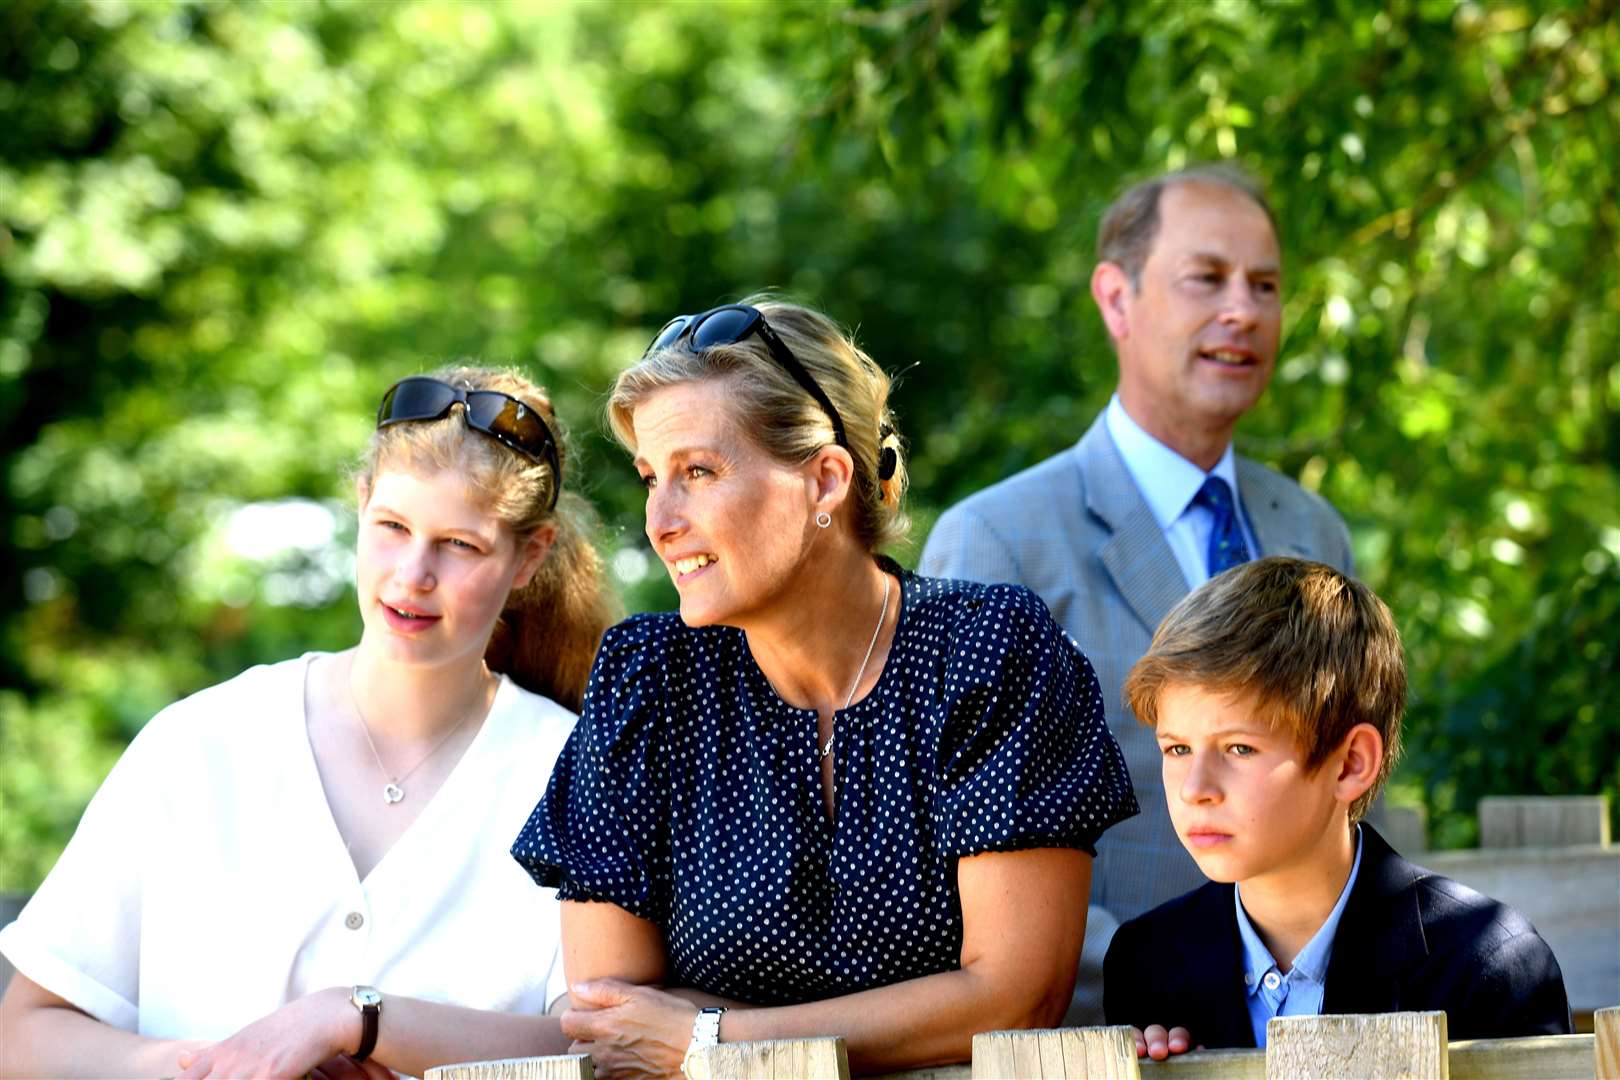 Lady Louise, her brother Viscount Severn and their parents the Earl and Countess of Wessex during a visit to the Wild Place Project in Bristol in 2019 (Jacob King/PA)